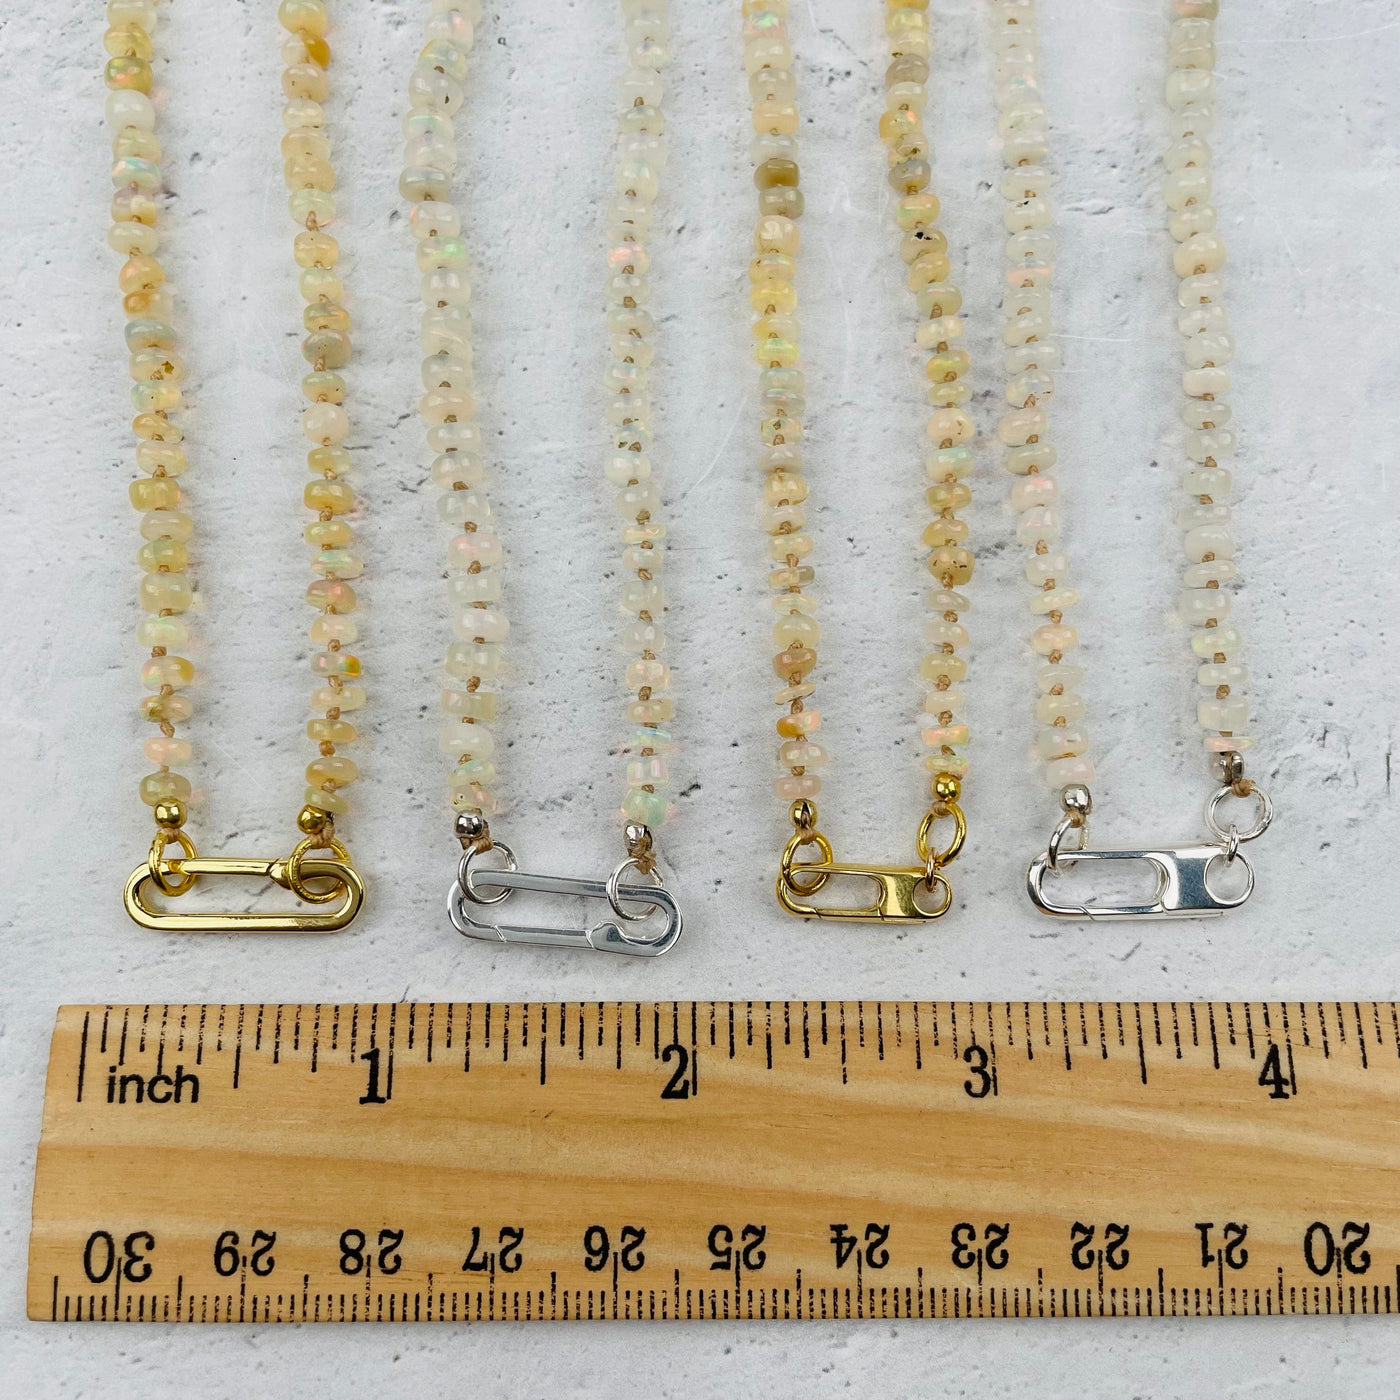 necklace bail next to a ruler for size reference 